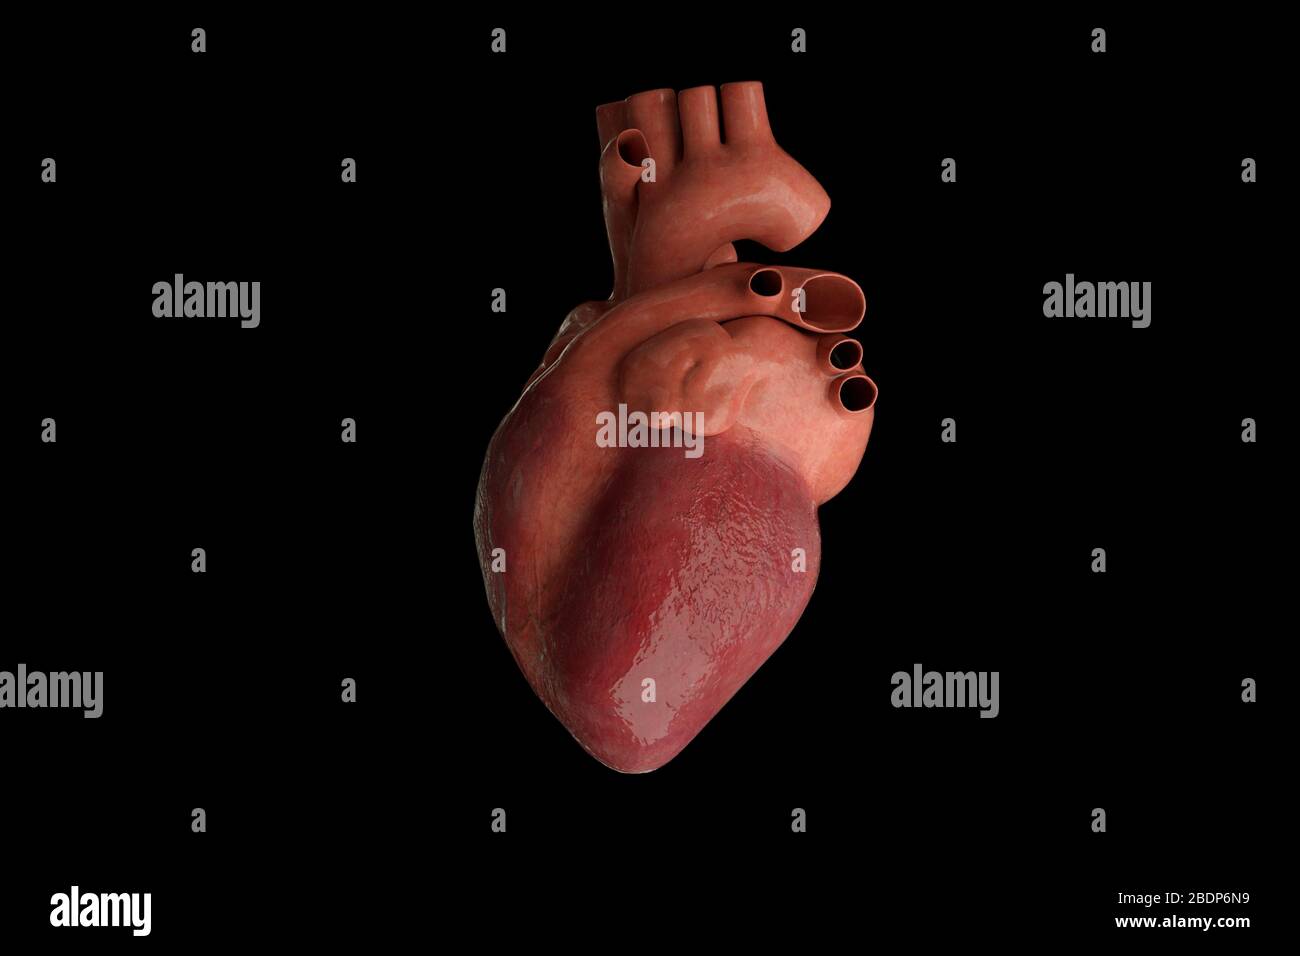 Human heart and arteries, 3d rendering Stock Photo